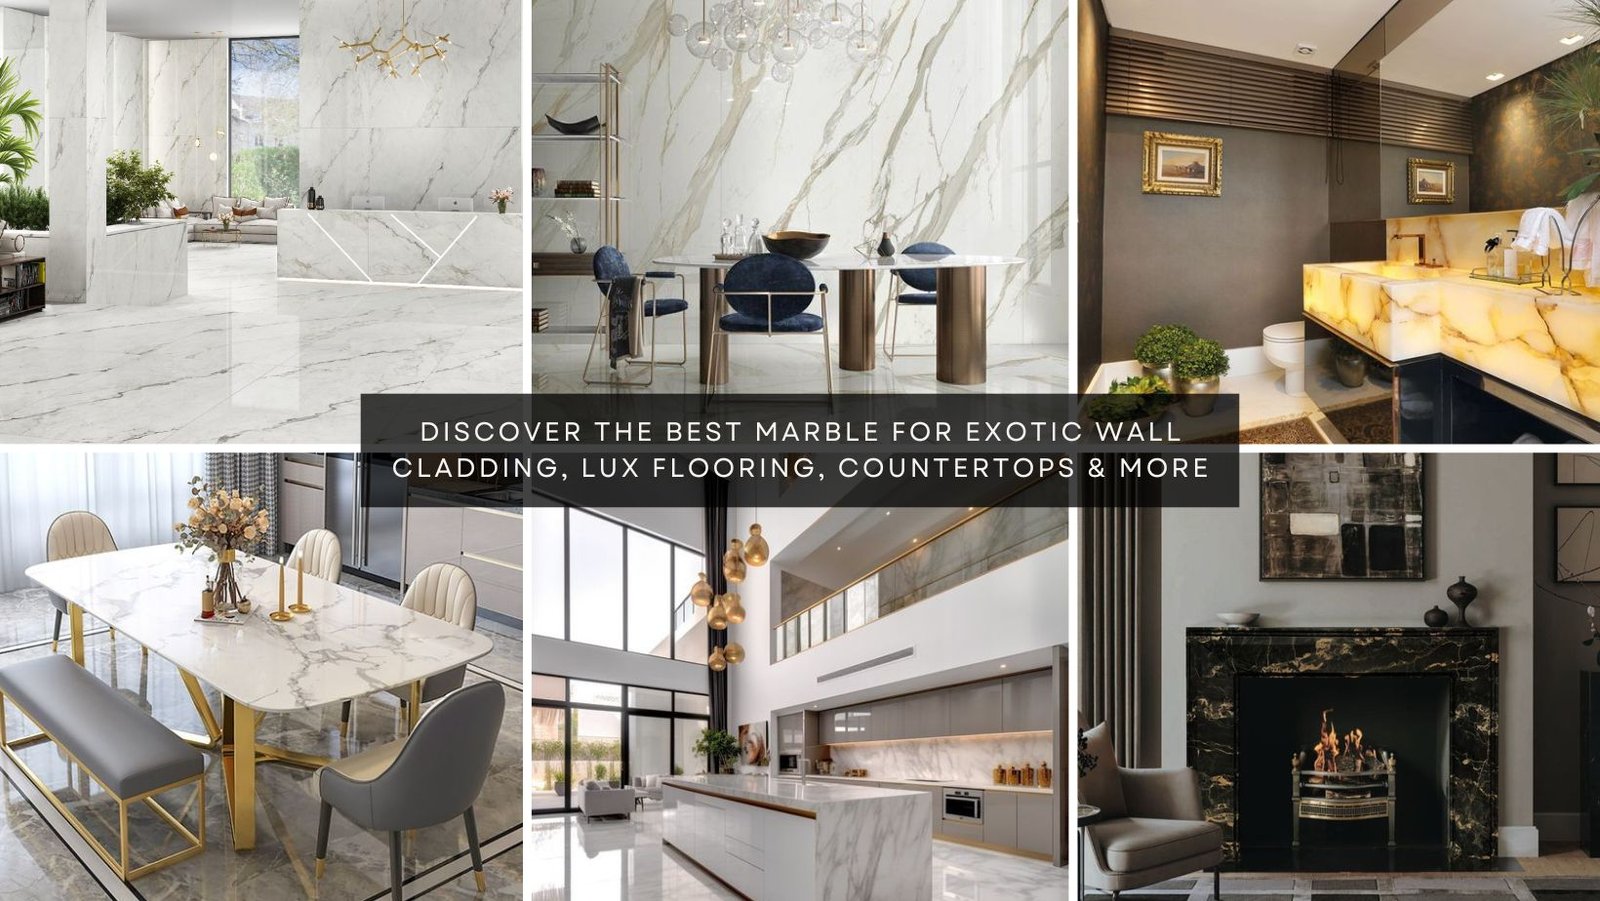 You are currently viewing Discover The Best Marble for Exotic Wall Cladding, Lux Flooring, Countertops & More